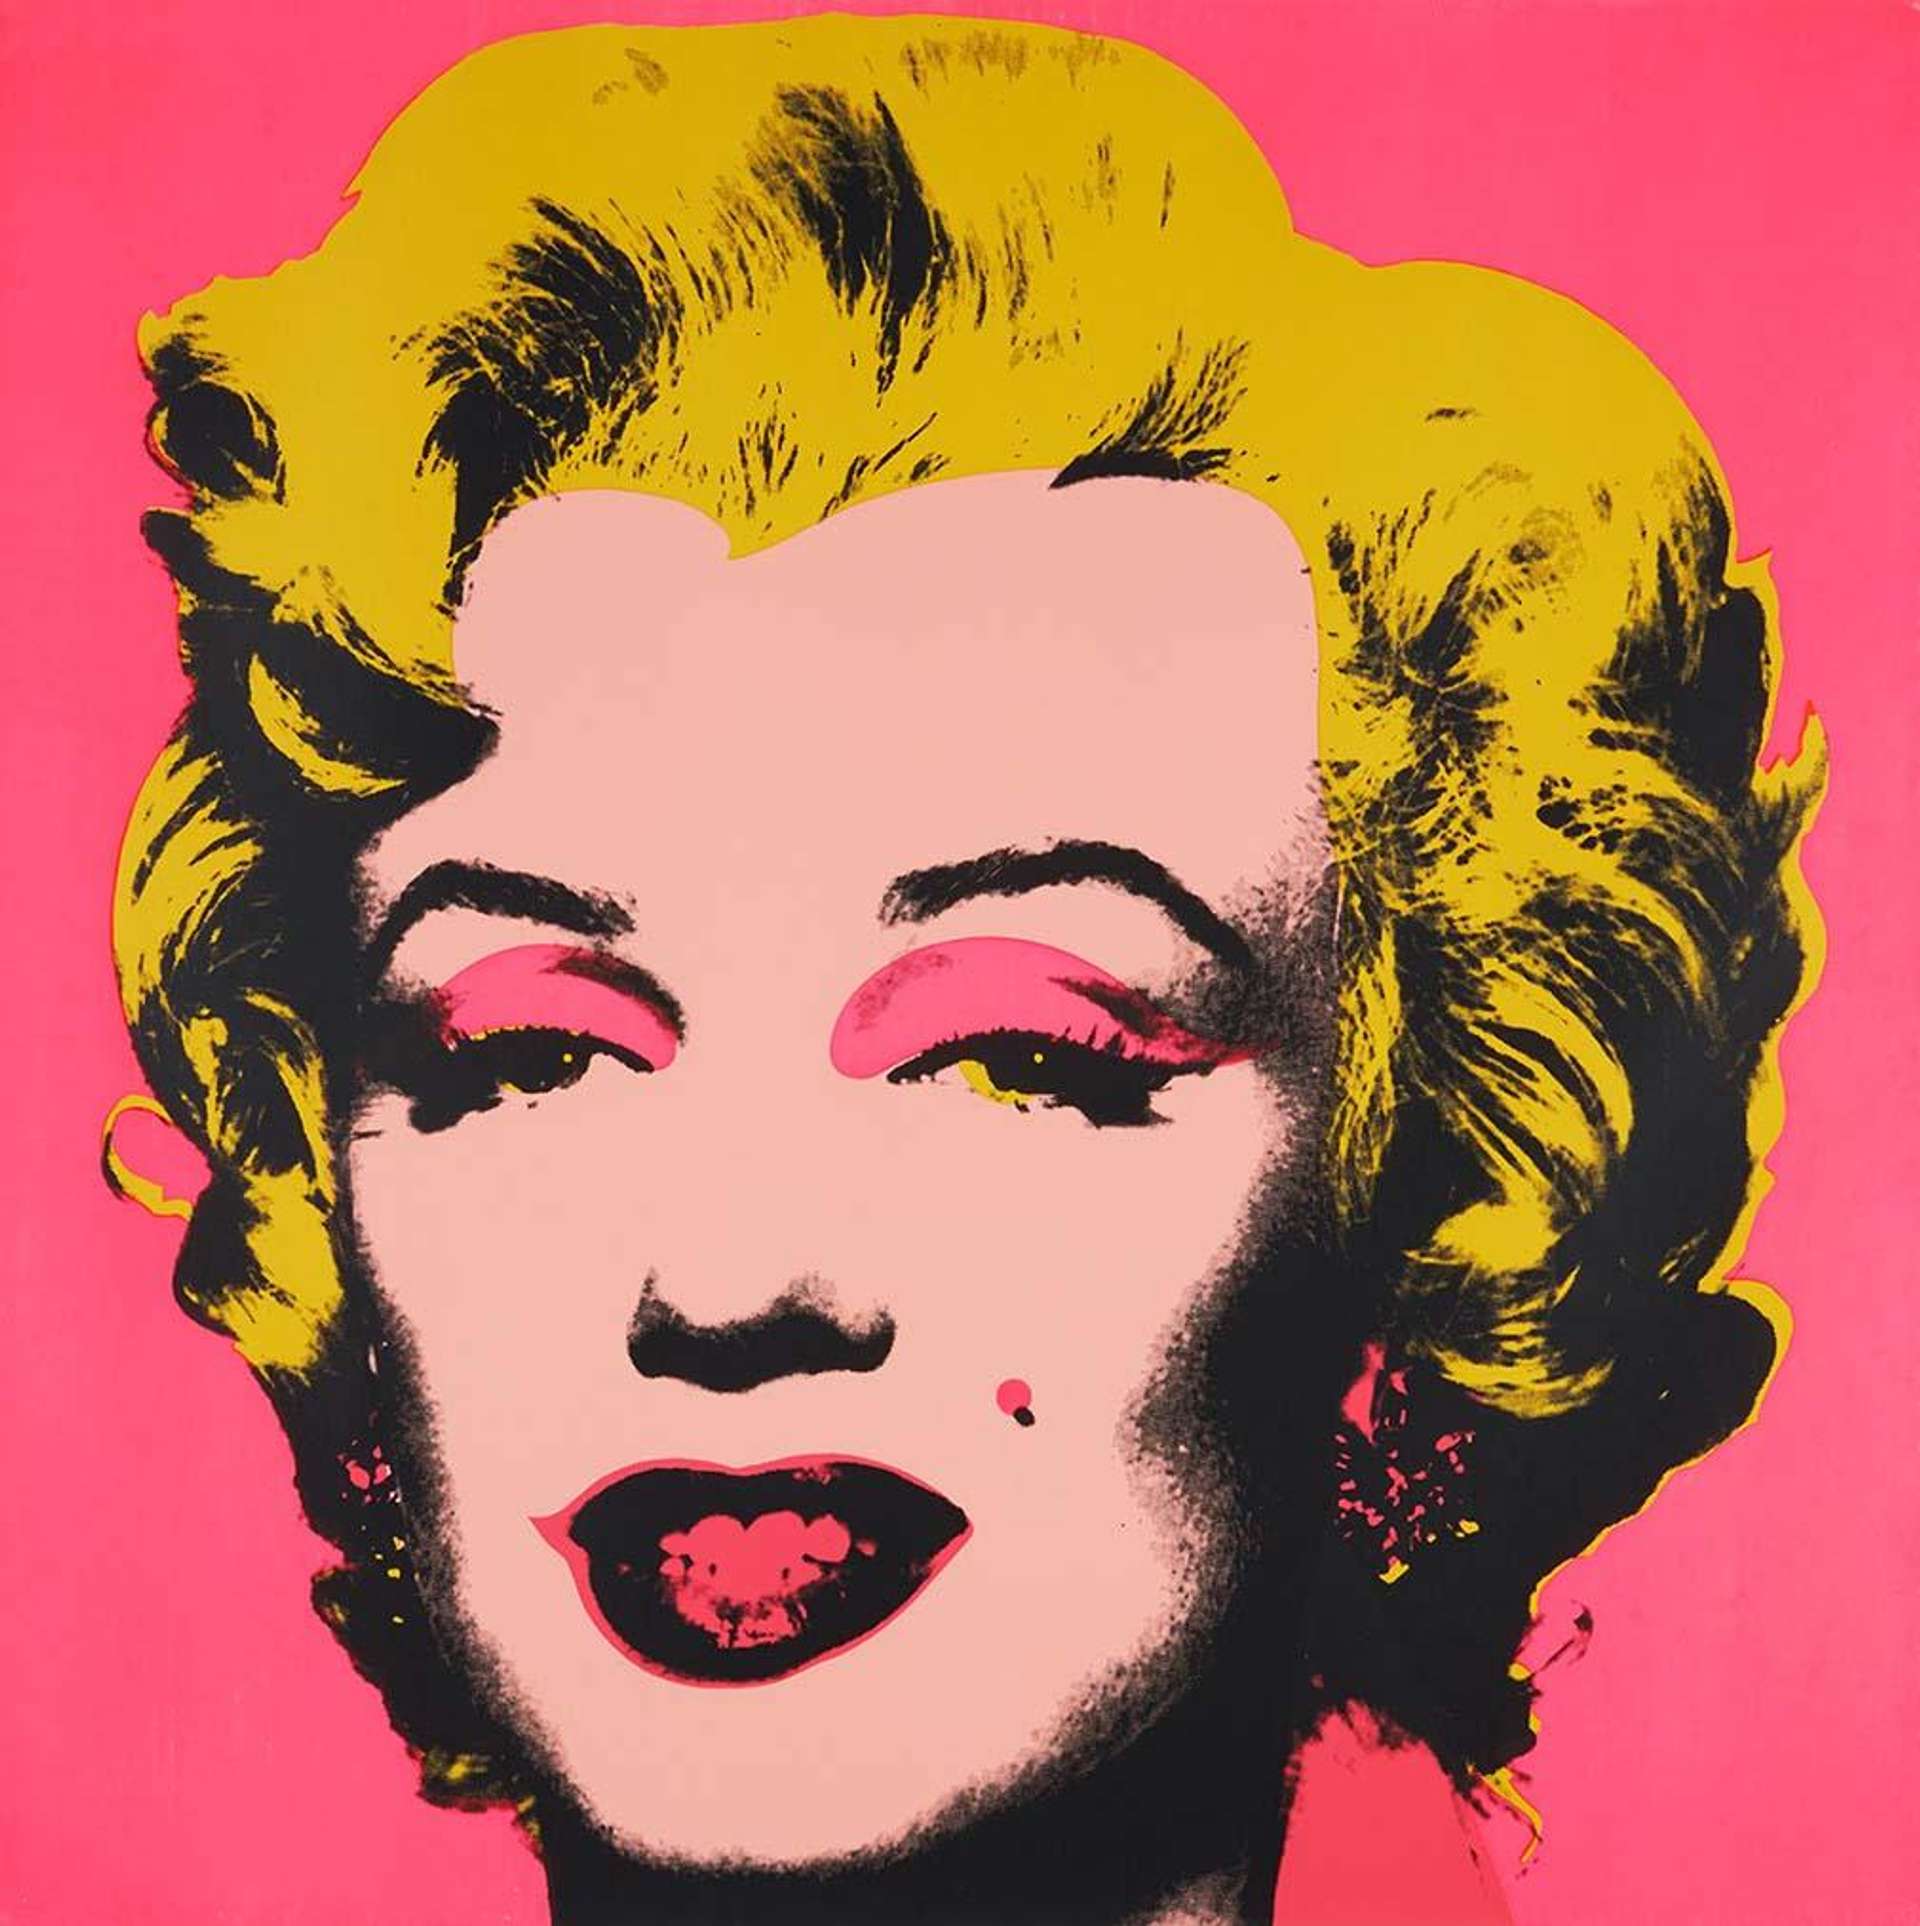 This print shows a portrait of the actress Marilyn Monroe, shown with her iconic bright yellow hair, pops of magenta on her eyelids and lips, set against a magenta backdrop.